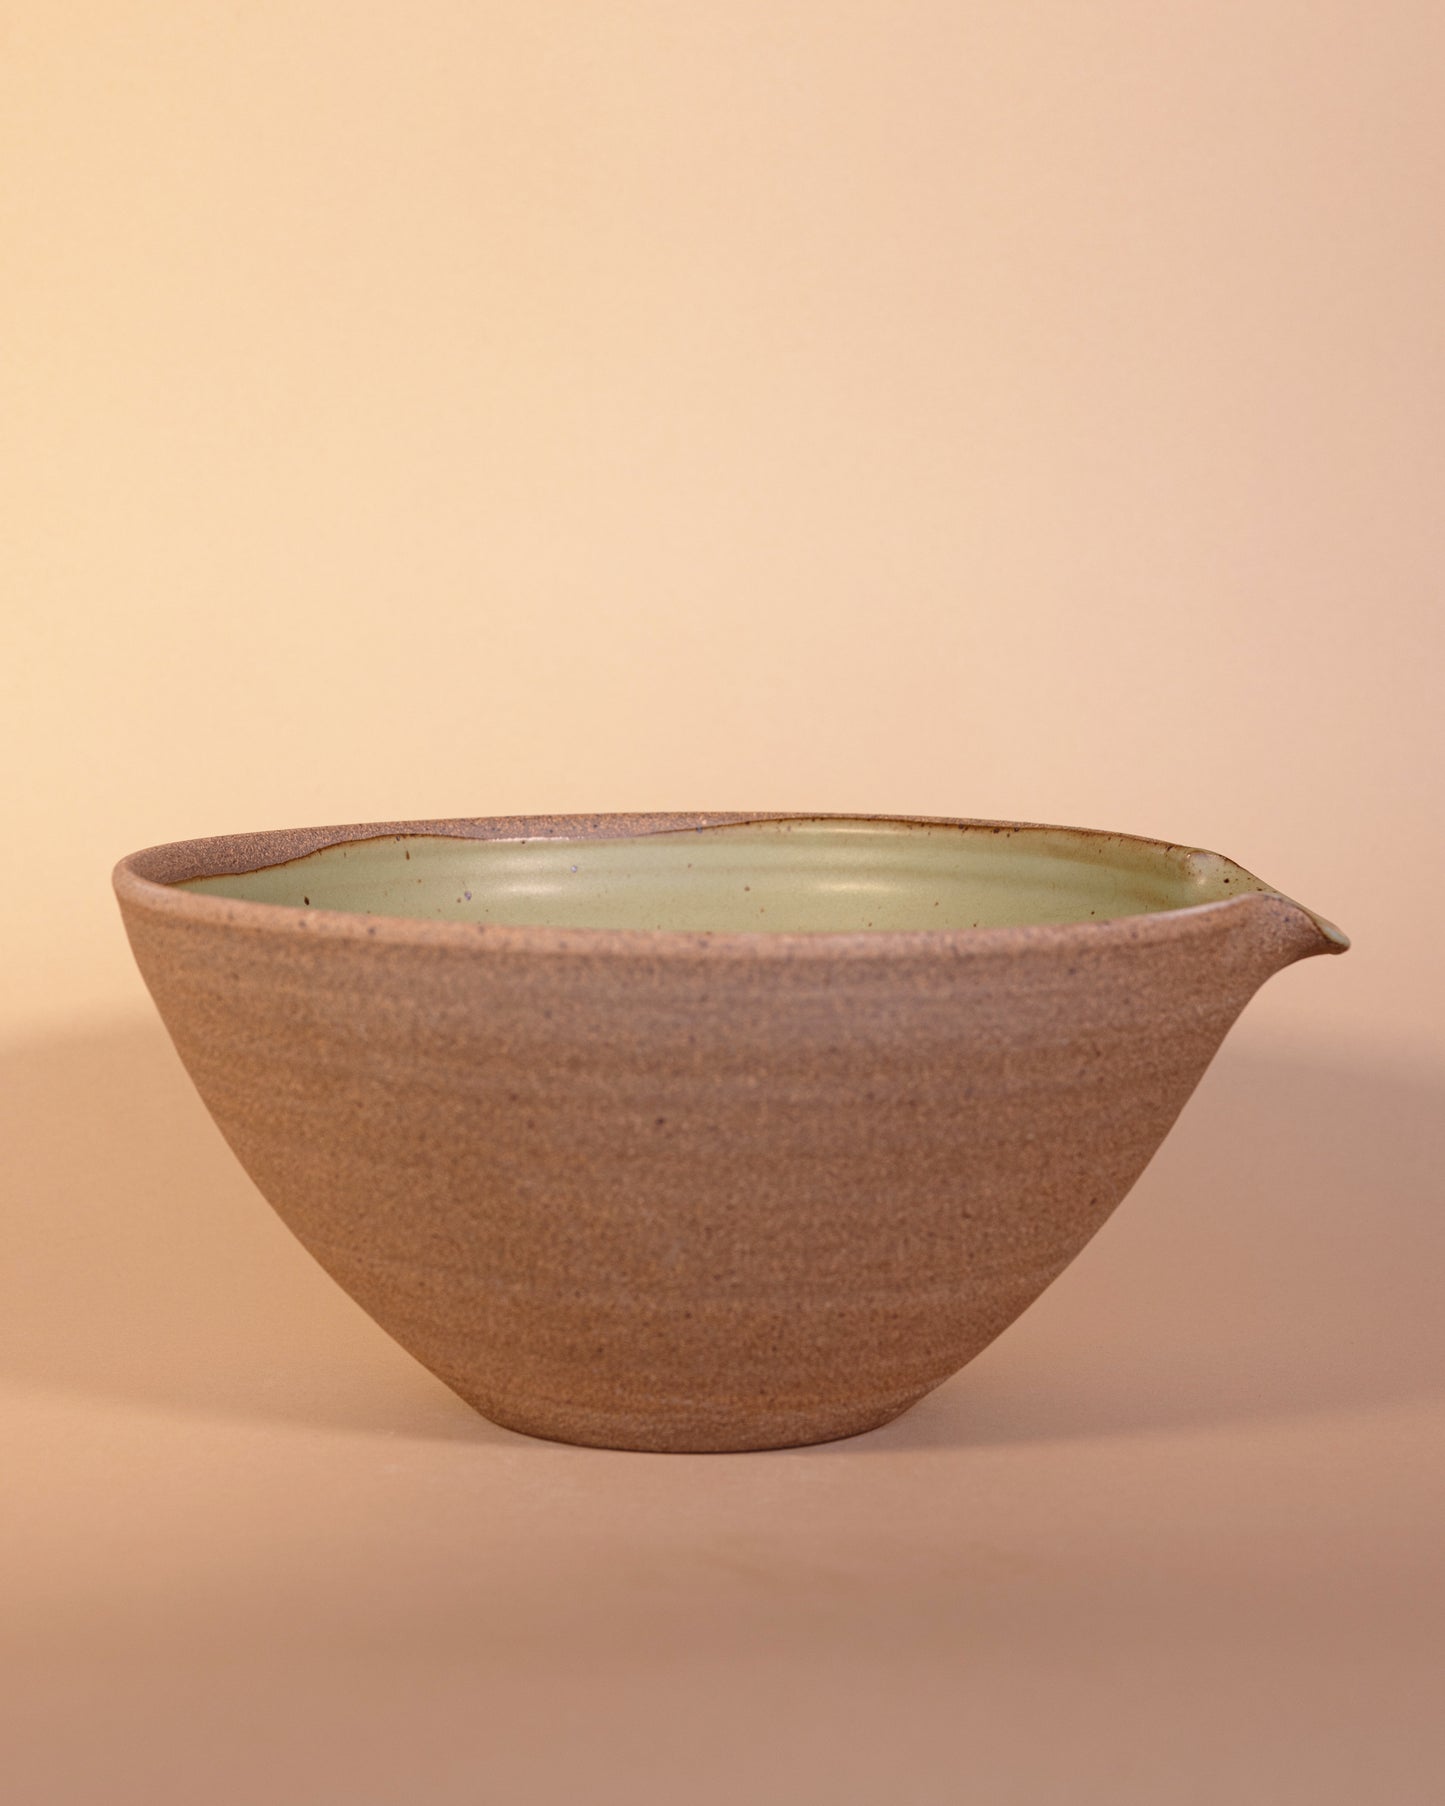 SPOUTED MIXING BOWL